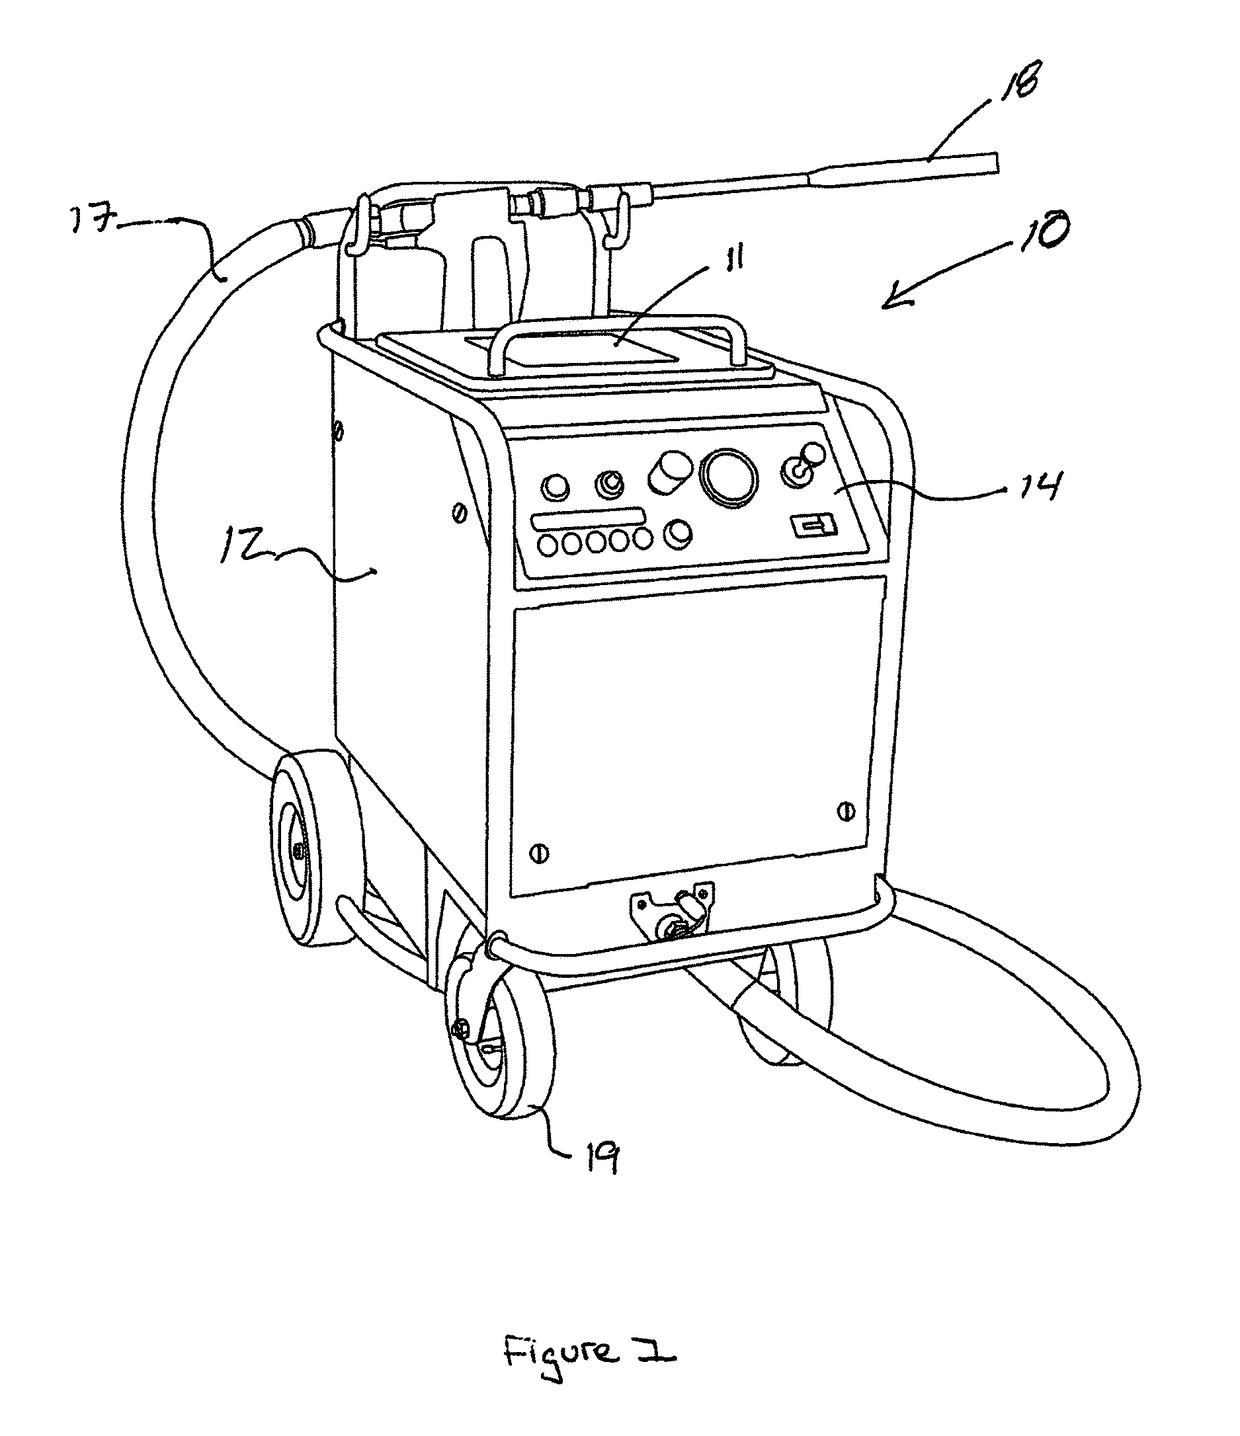 Dry ice blast cleaning system and method for operating the same